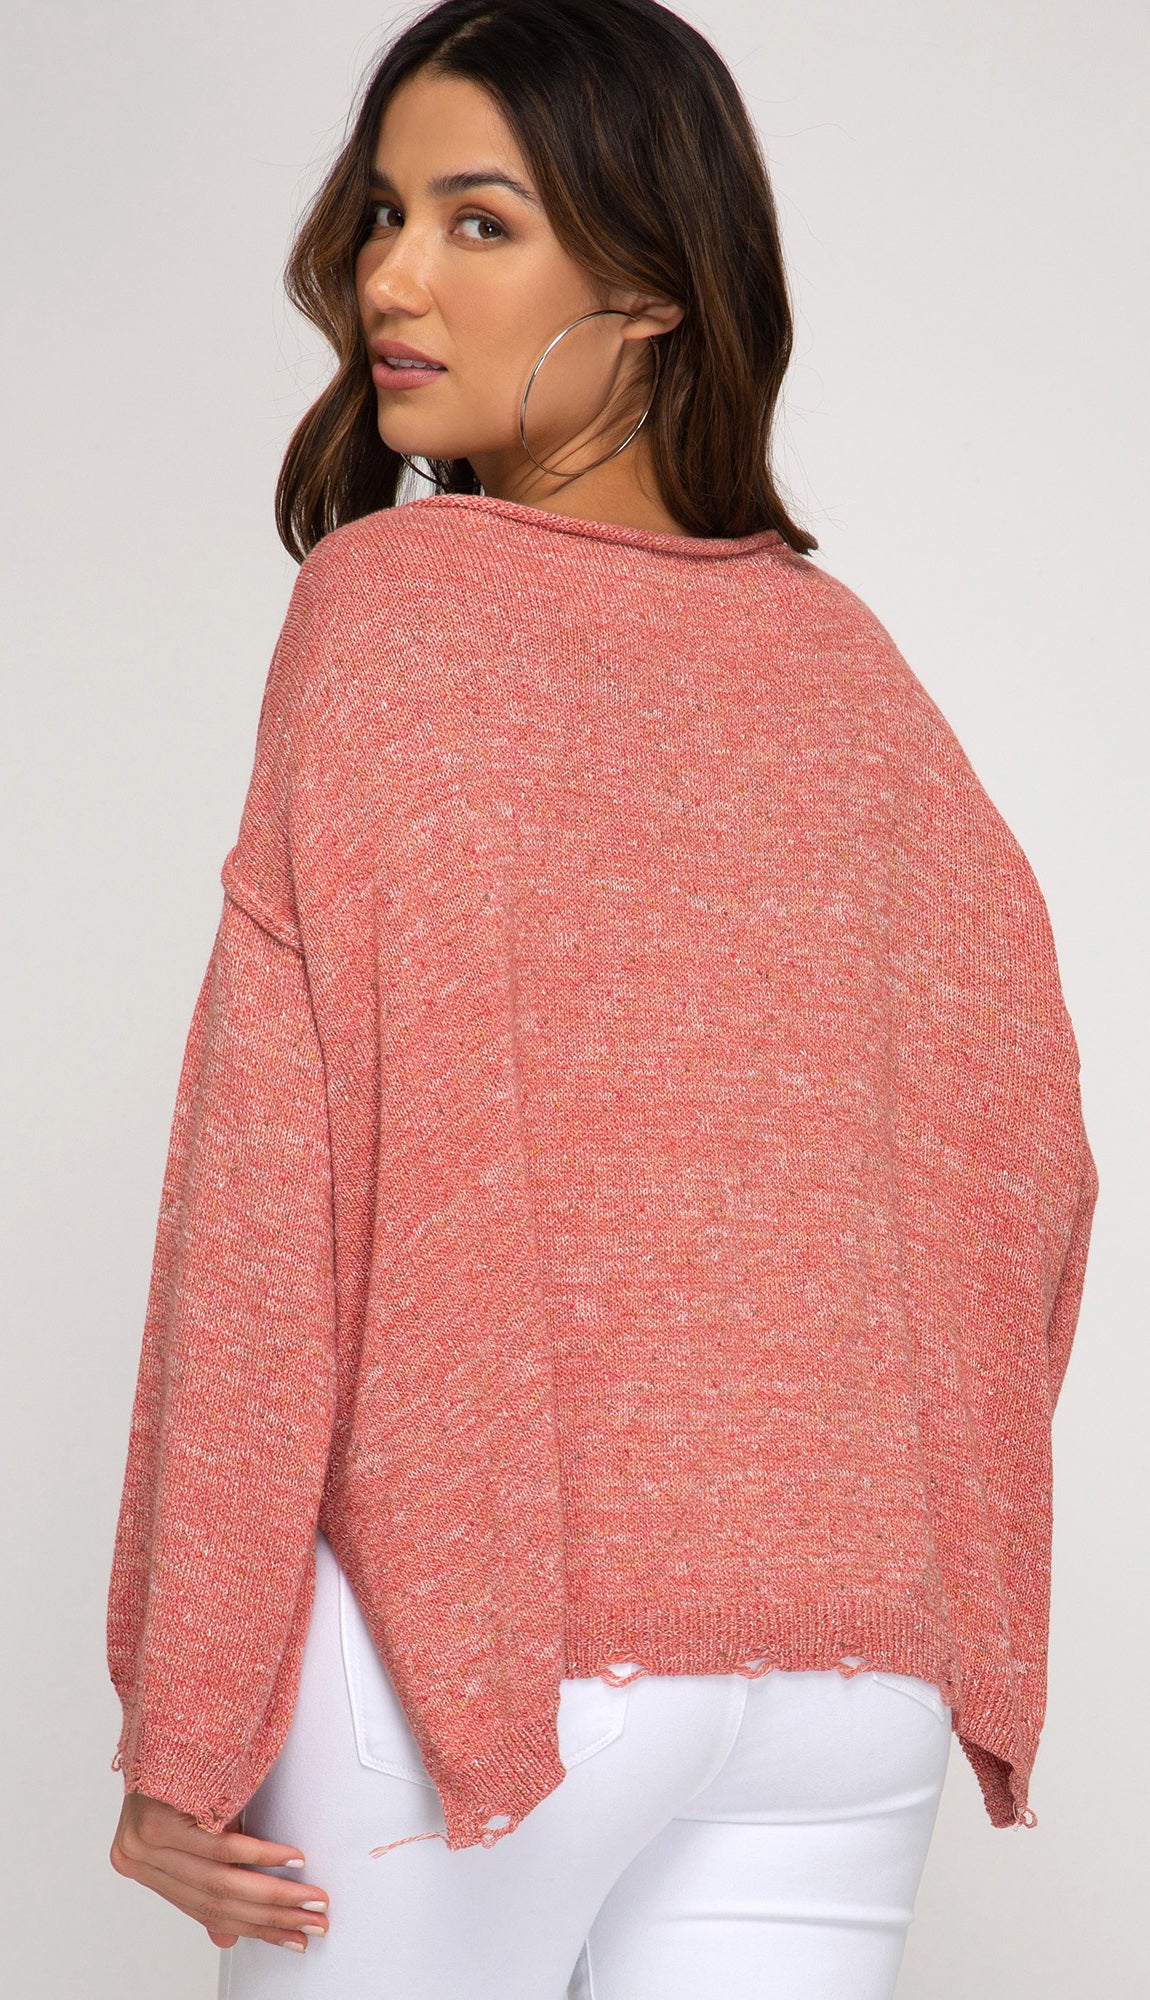 Easy Does It Distressed Pocket Sweater- Red